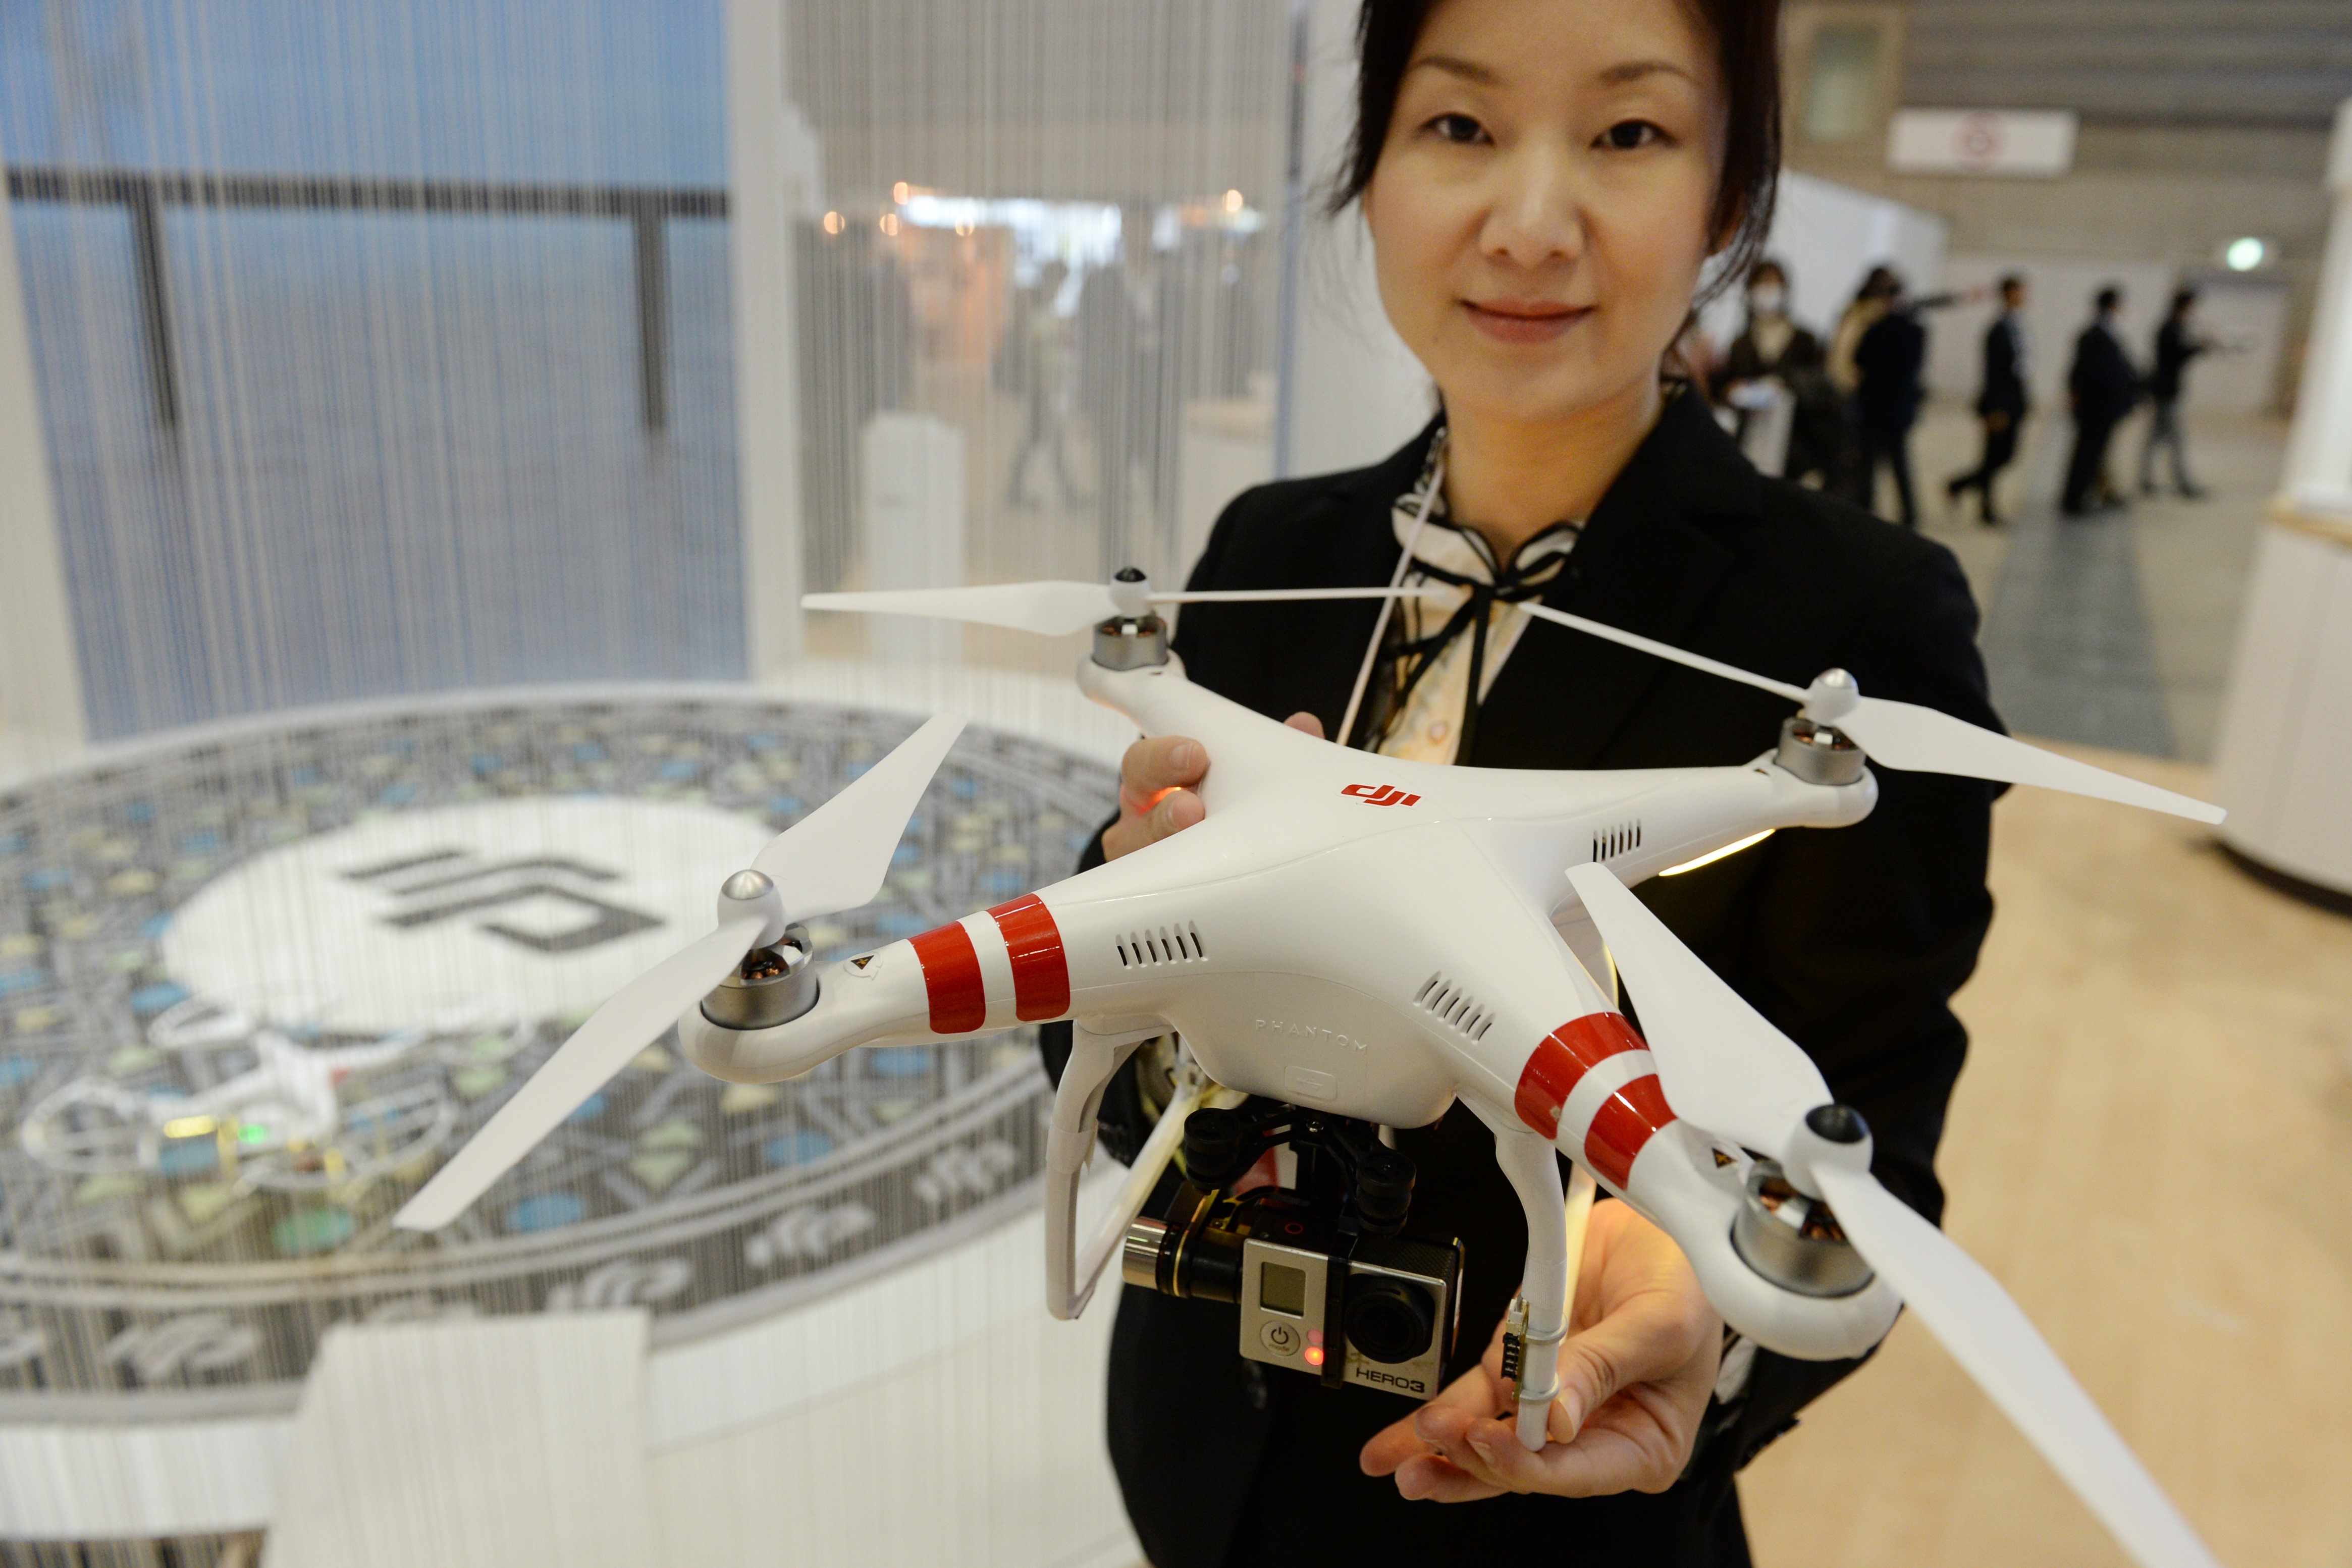 A DJI employee shows off the company's latest "Phantom 2" radio-controlled multicopter with small video camera at the DJI booth during the "CP+2014," camera and photo imaging show in Yokohama on February 13, 2014. (Toshifumi Kitamura&mdash;AFP/Getty Images)